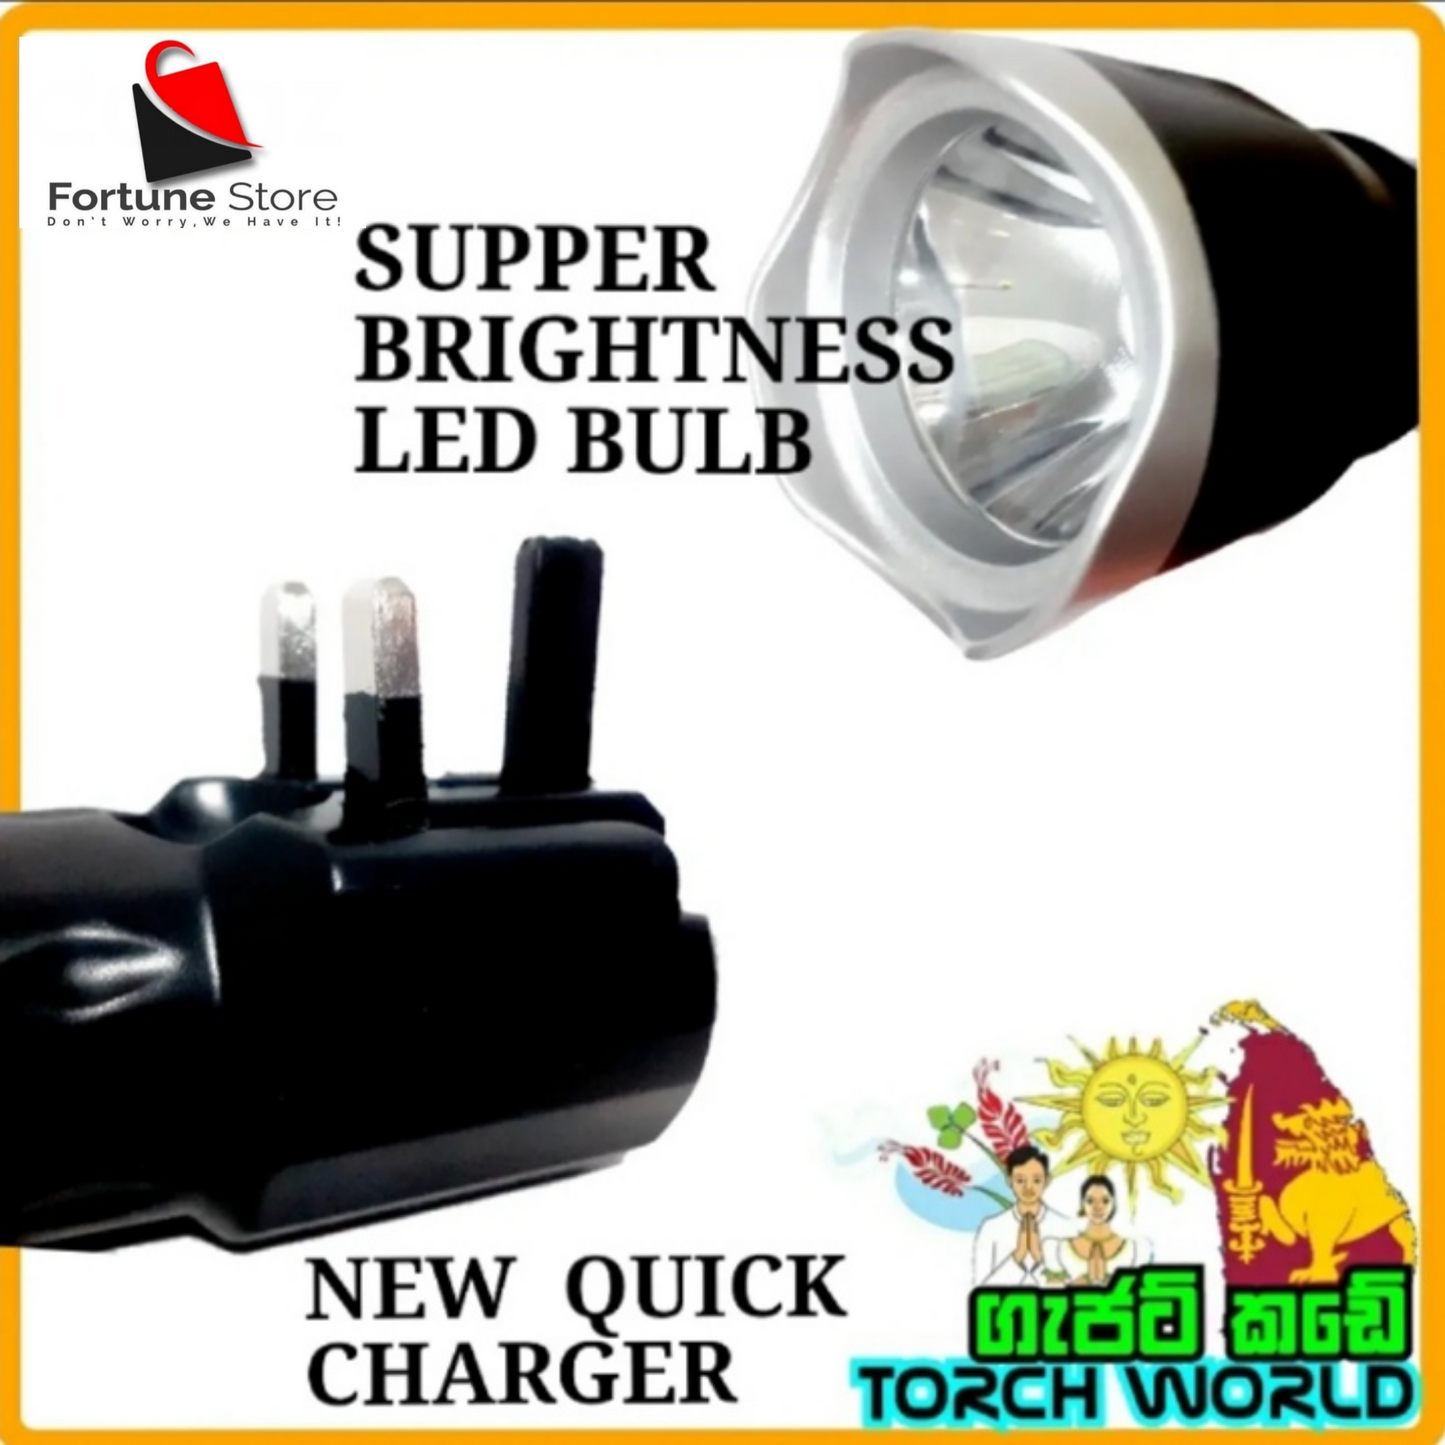 Torch Rechargeable & Flashlights Aiko Brand - Free Delivery